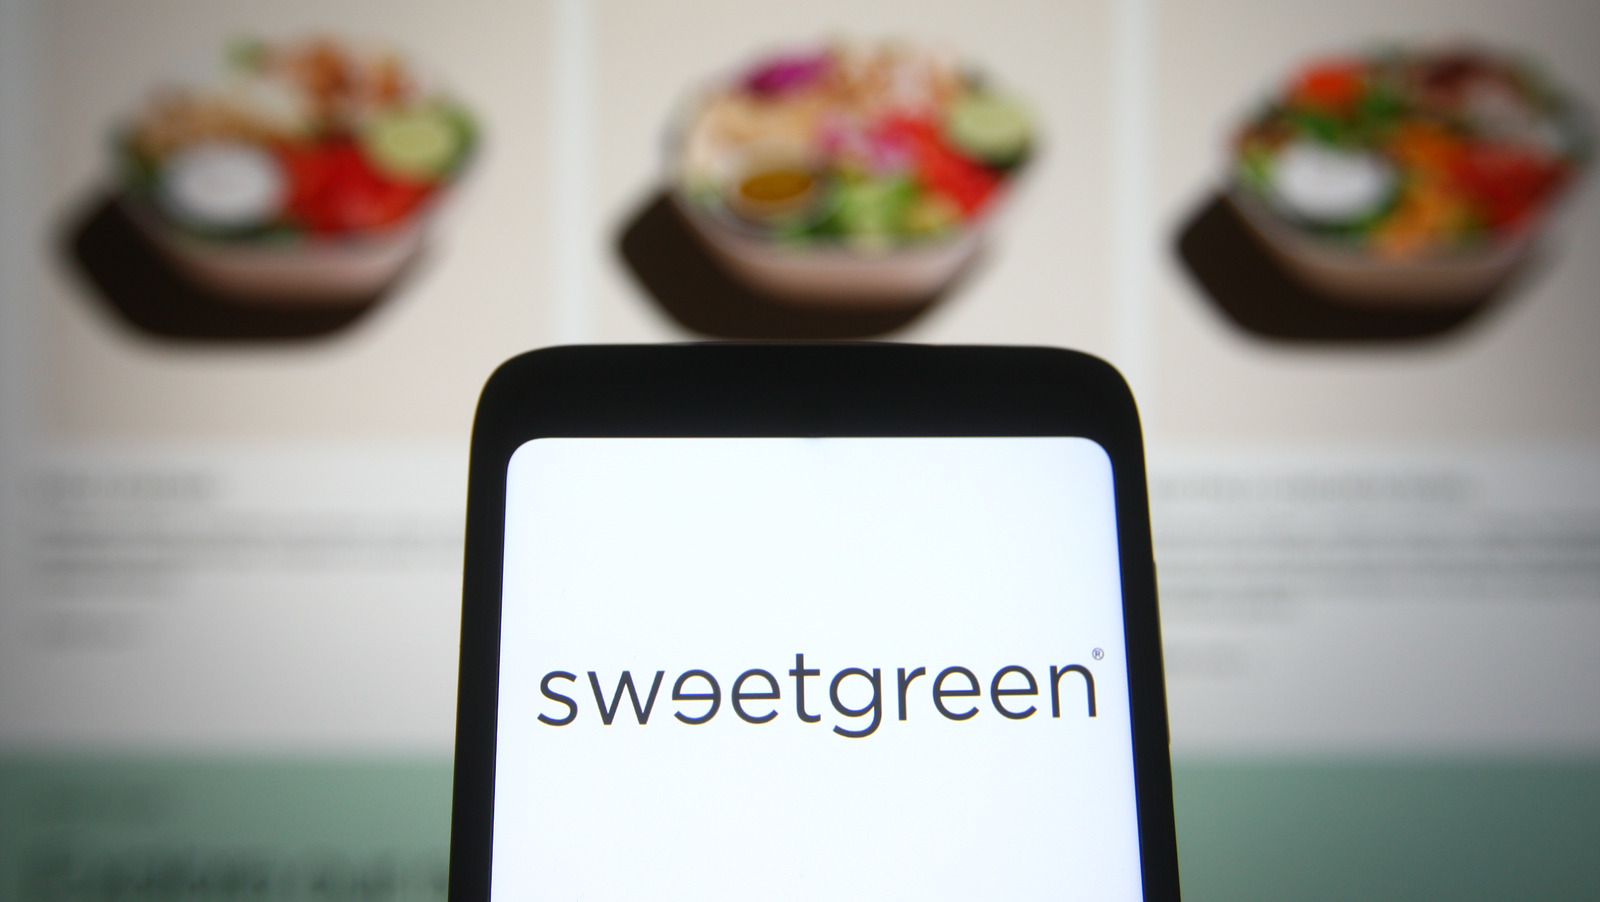 Sweetgreen’s New Initiative Tells You Which Menu Items Have The Smallest Carbon Footprint – The Daily Meal